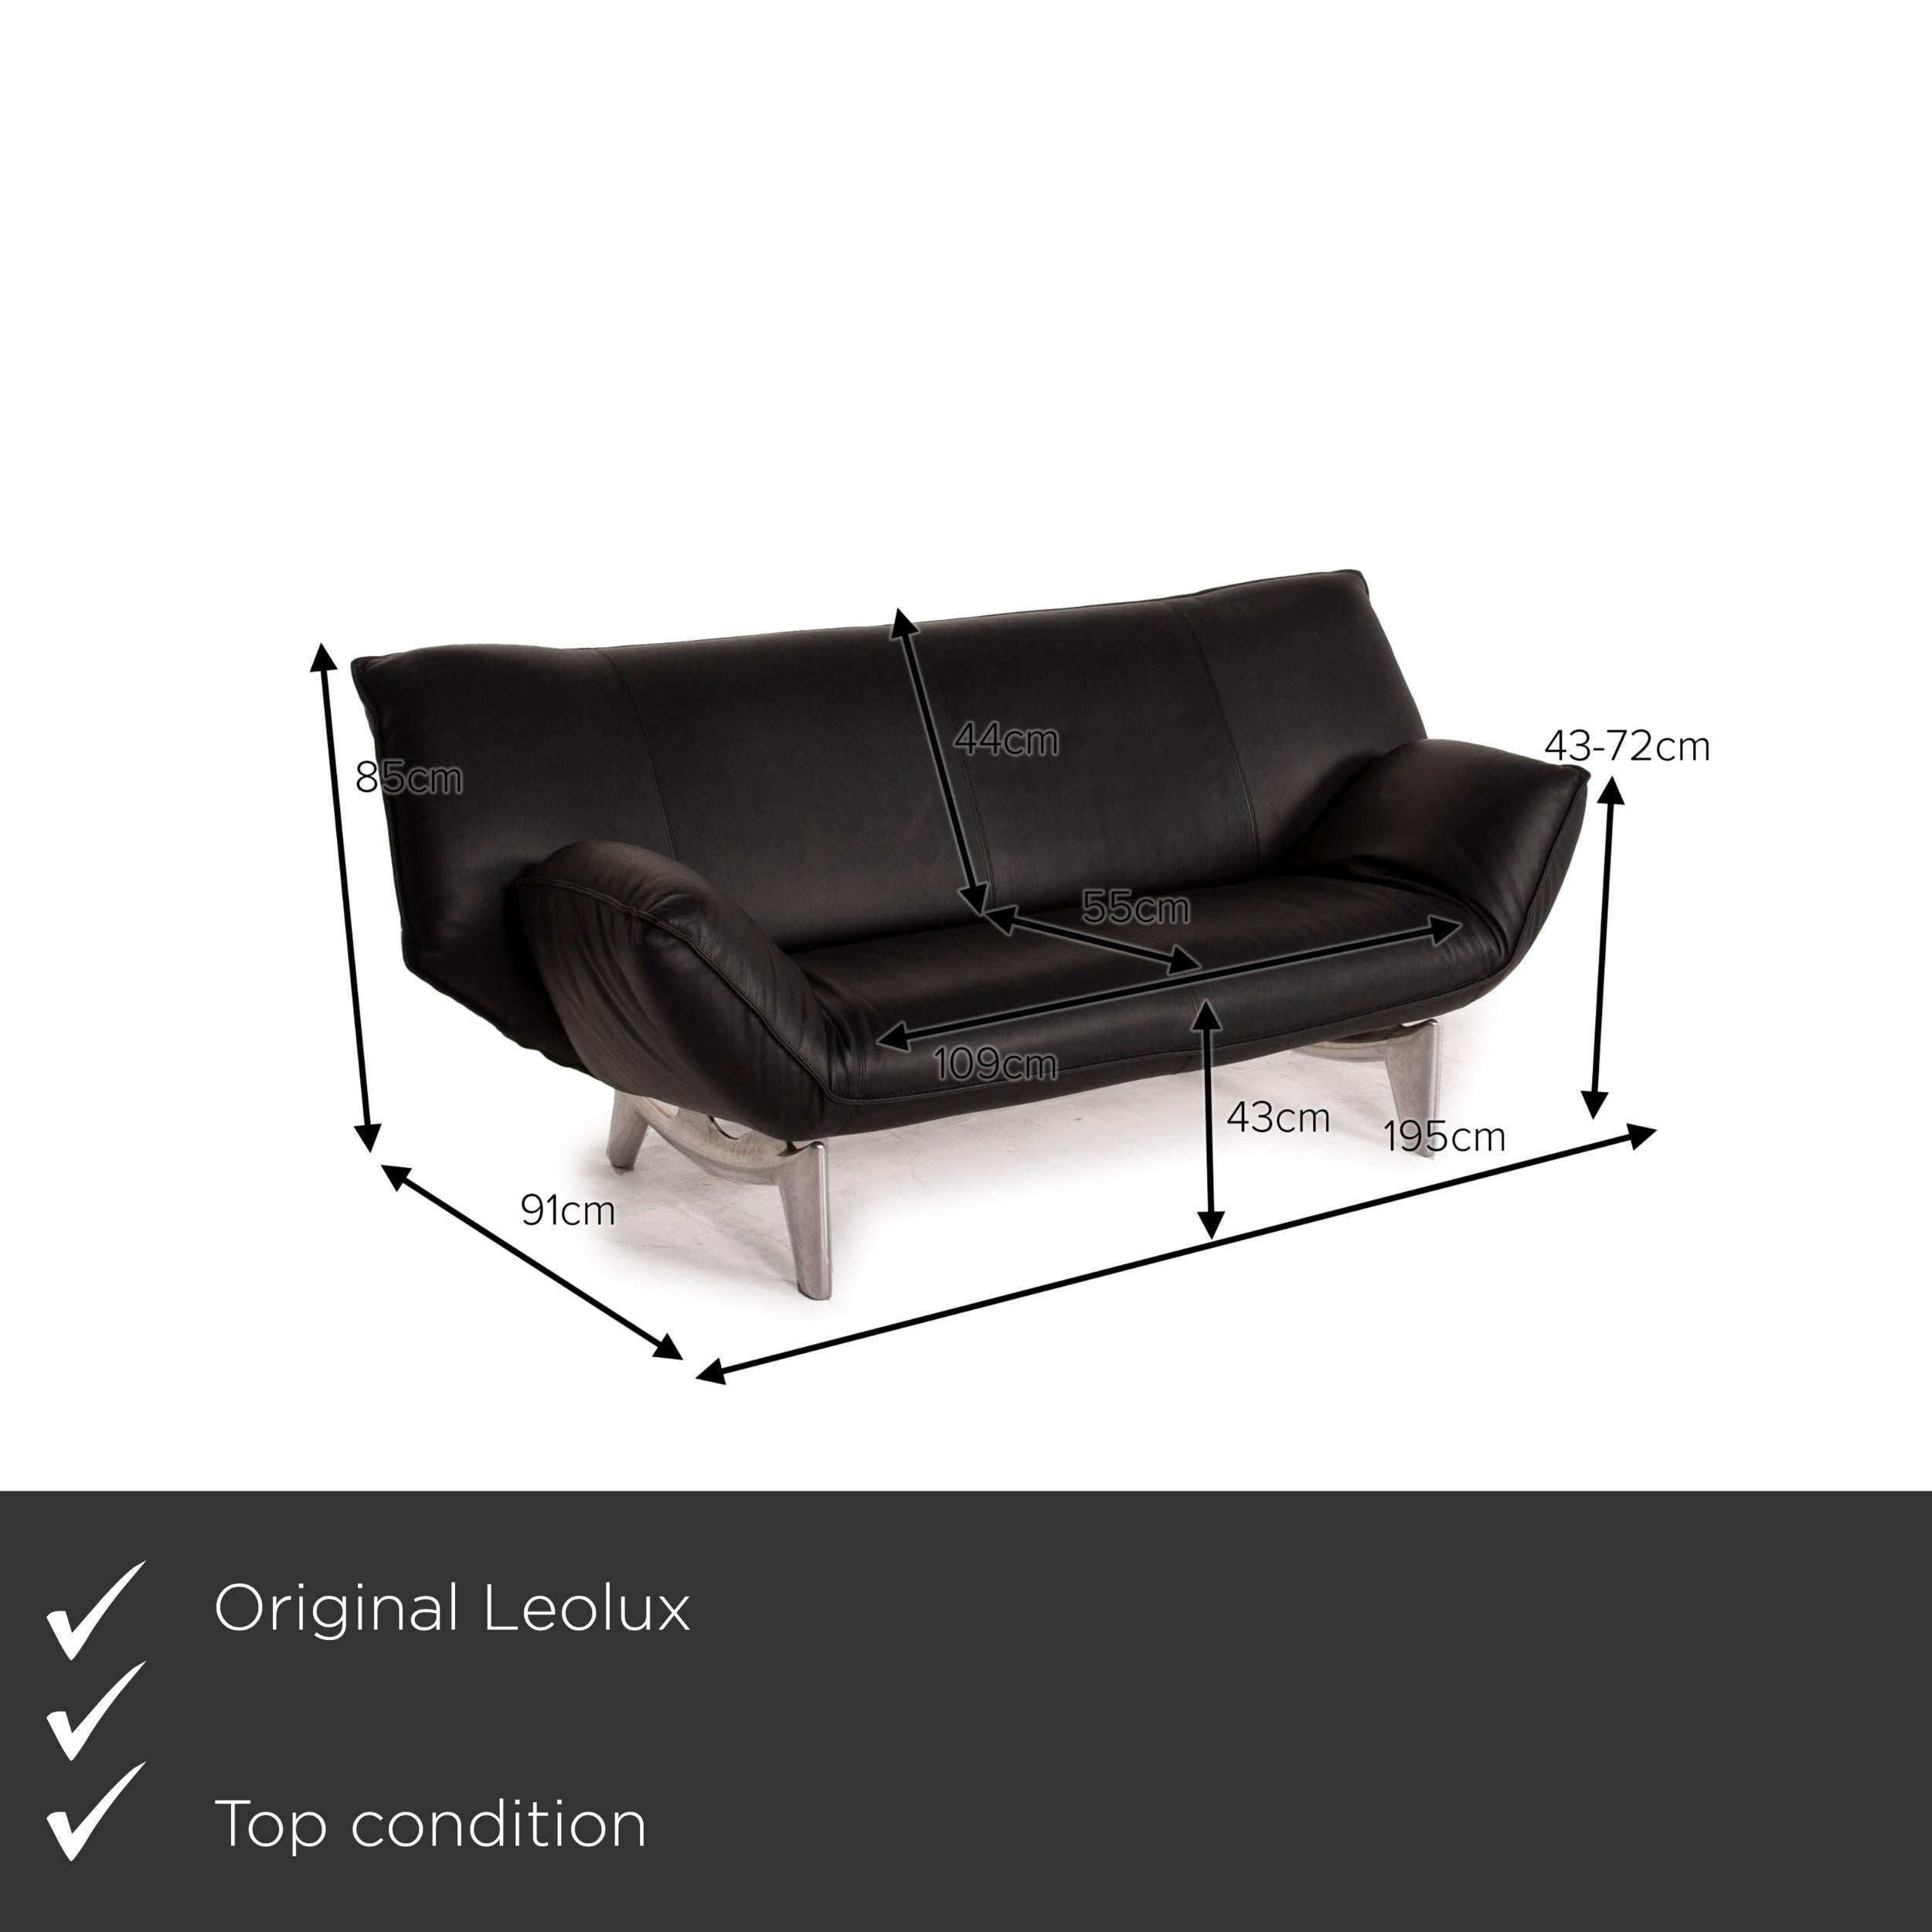 We present to you a Leolux Tango leather sofa black two-seater.


 Product measurements in centimeters:
 

Depth: 91
Width: 195
Height: 85
Seat height: 43
Rest height: 43
Seat depth: 55
Seat width: 109
Back height: 44.
 